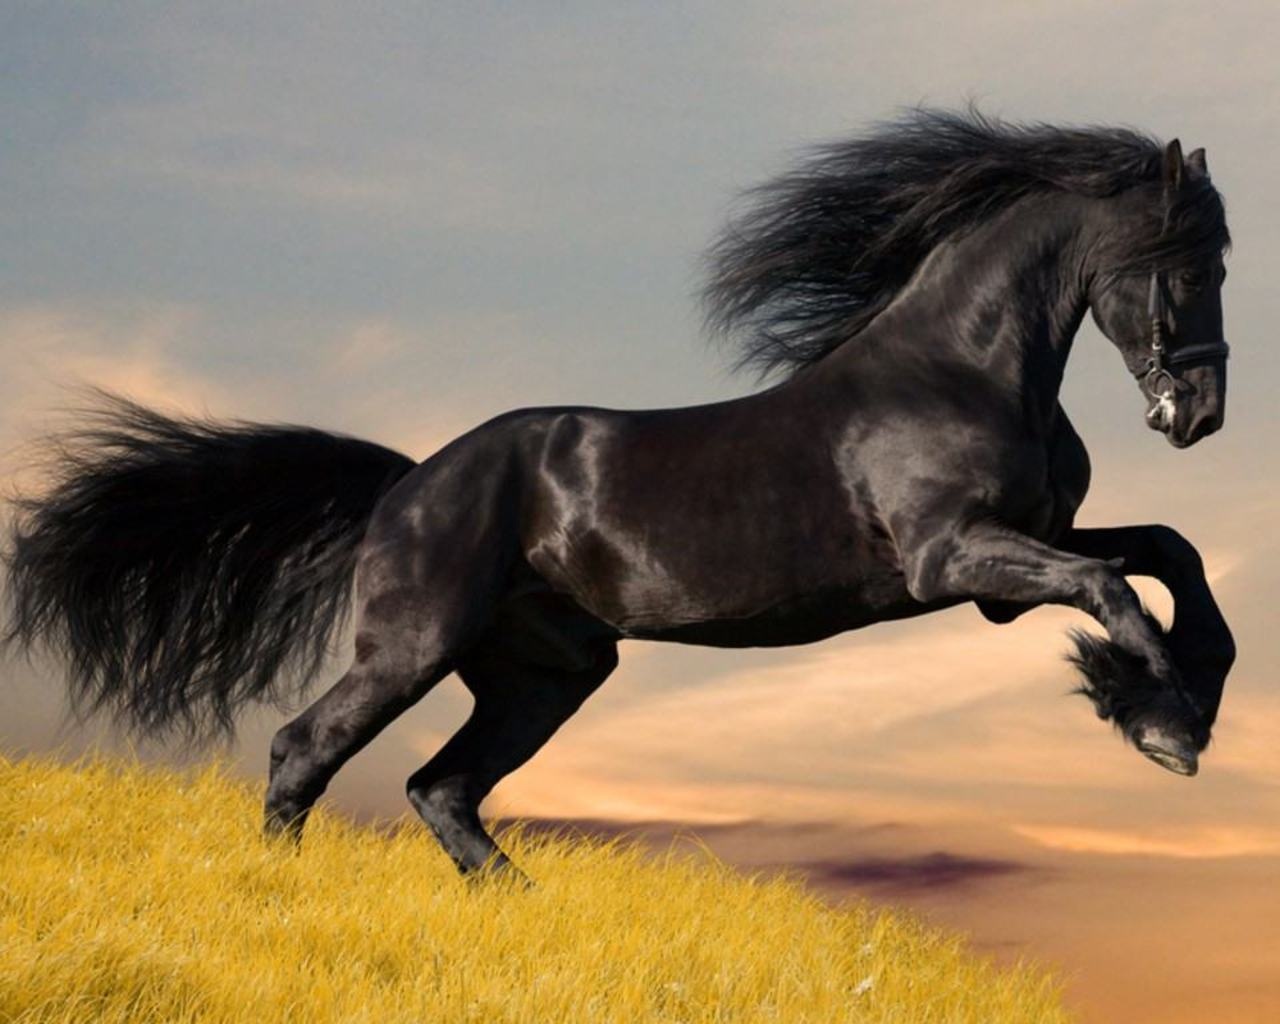 The Arabian horse plays a prominent part in Awakening the Beast. Below are excerpts from Wikipedia.